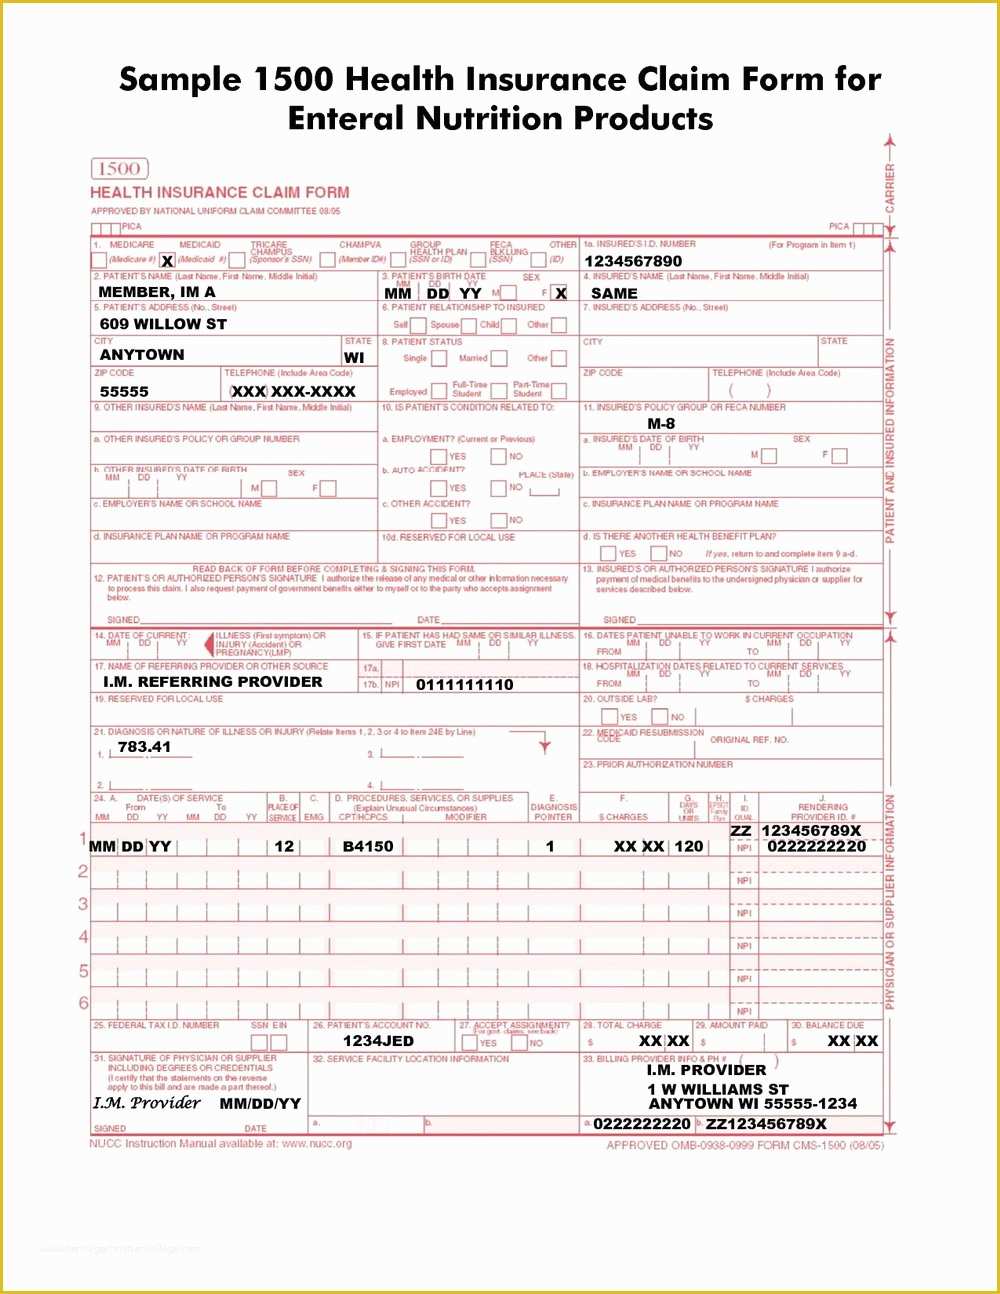 Free Health Insurance Claim form 1500 Template Of 1500 Health Insurance Claim form Instructions forms